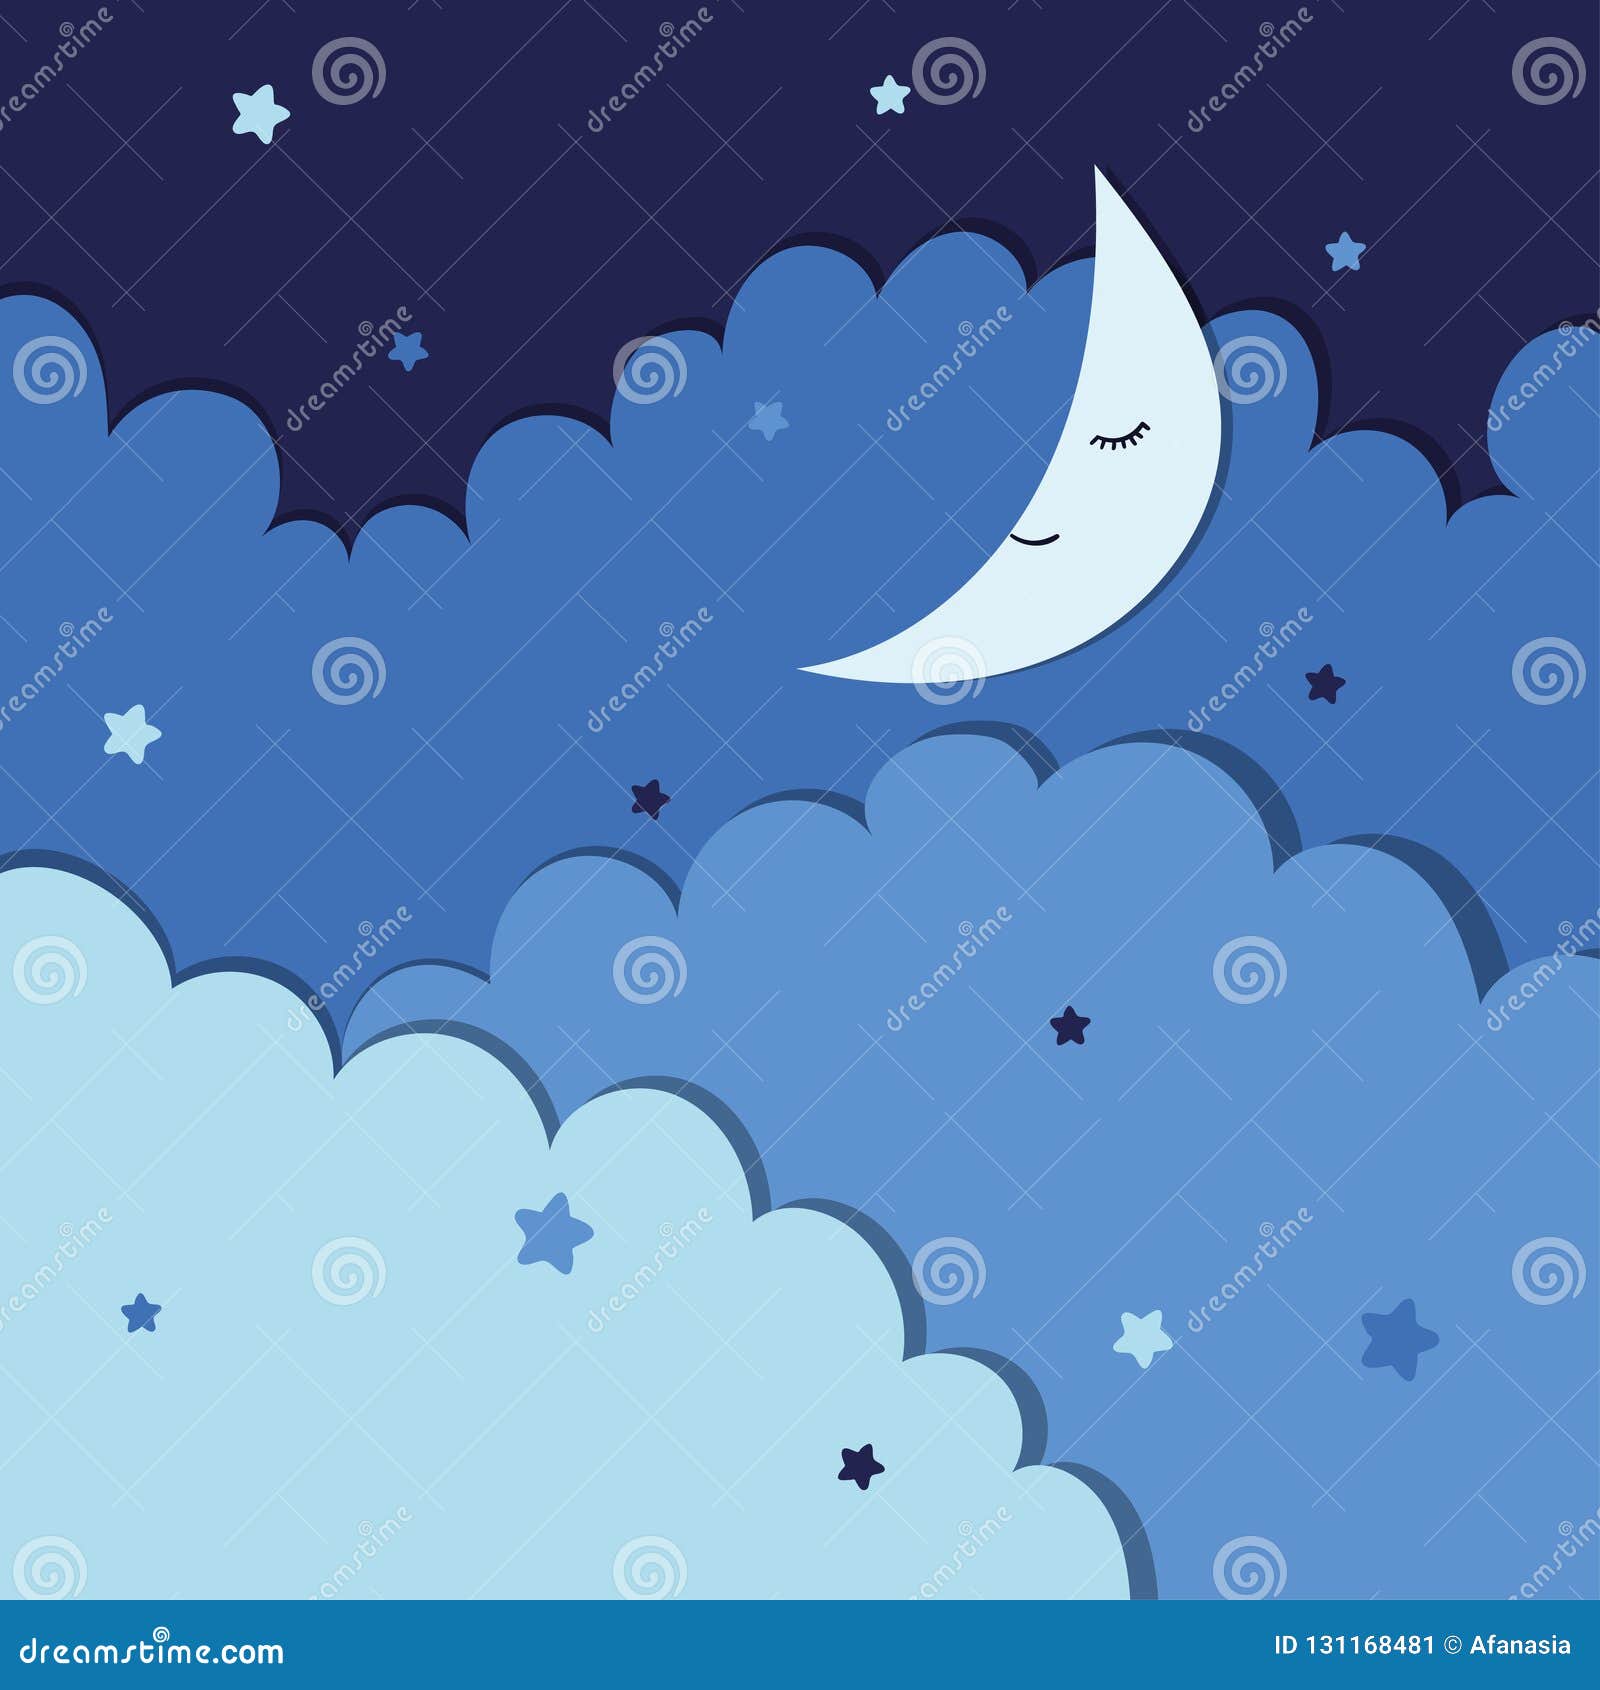 Vector Illustration of Night Sky with Stars, Clouds and Moon. Stock ...